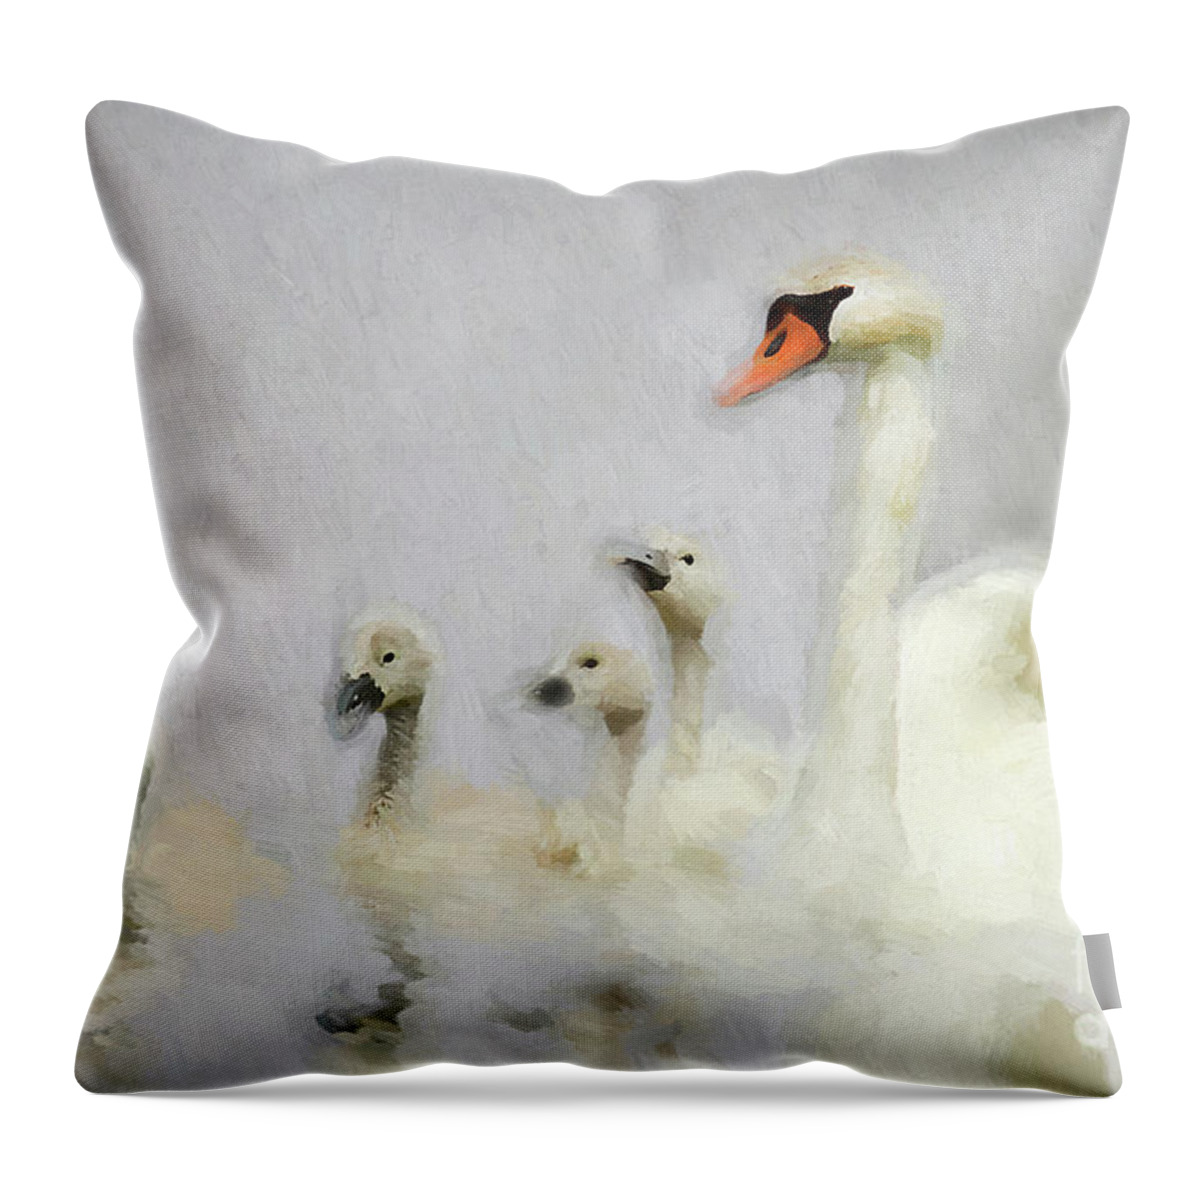 Lake Throw Pillow featuring the photograph Pen and her Cygnets by Darren Fisher